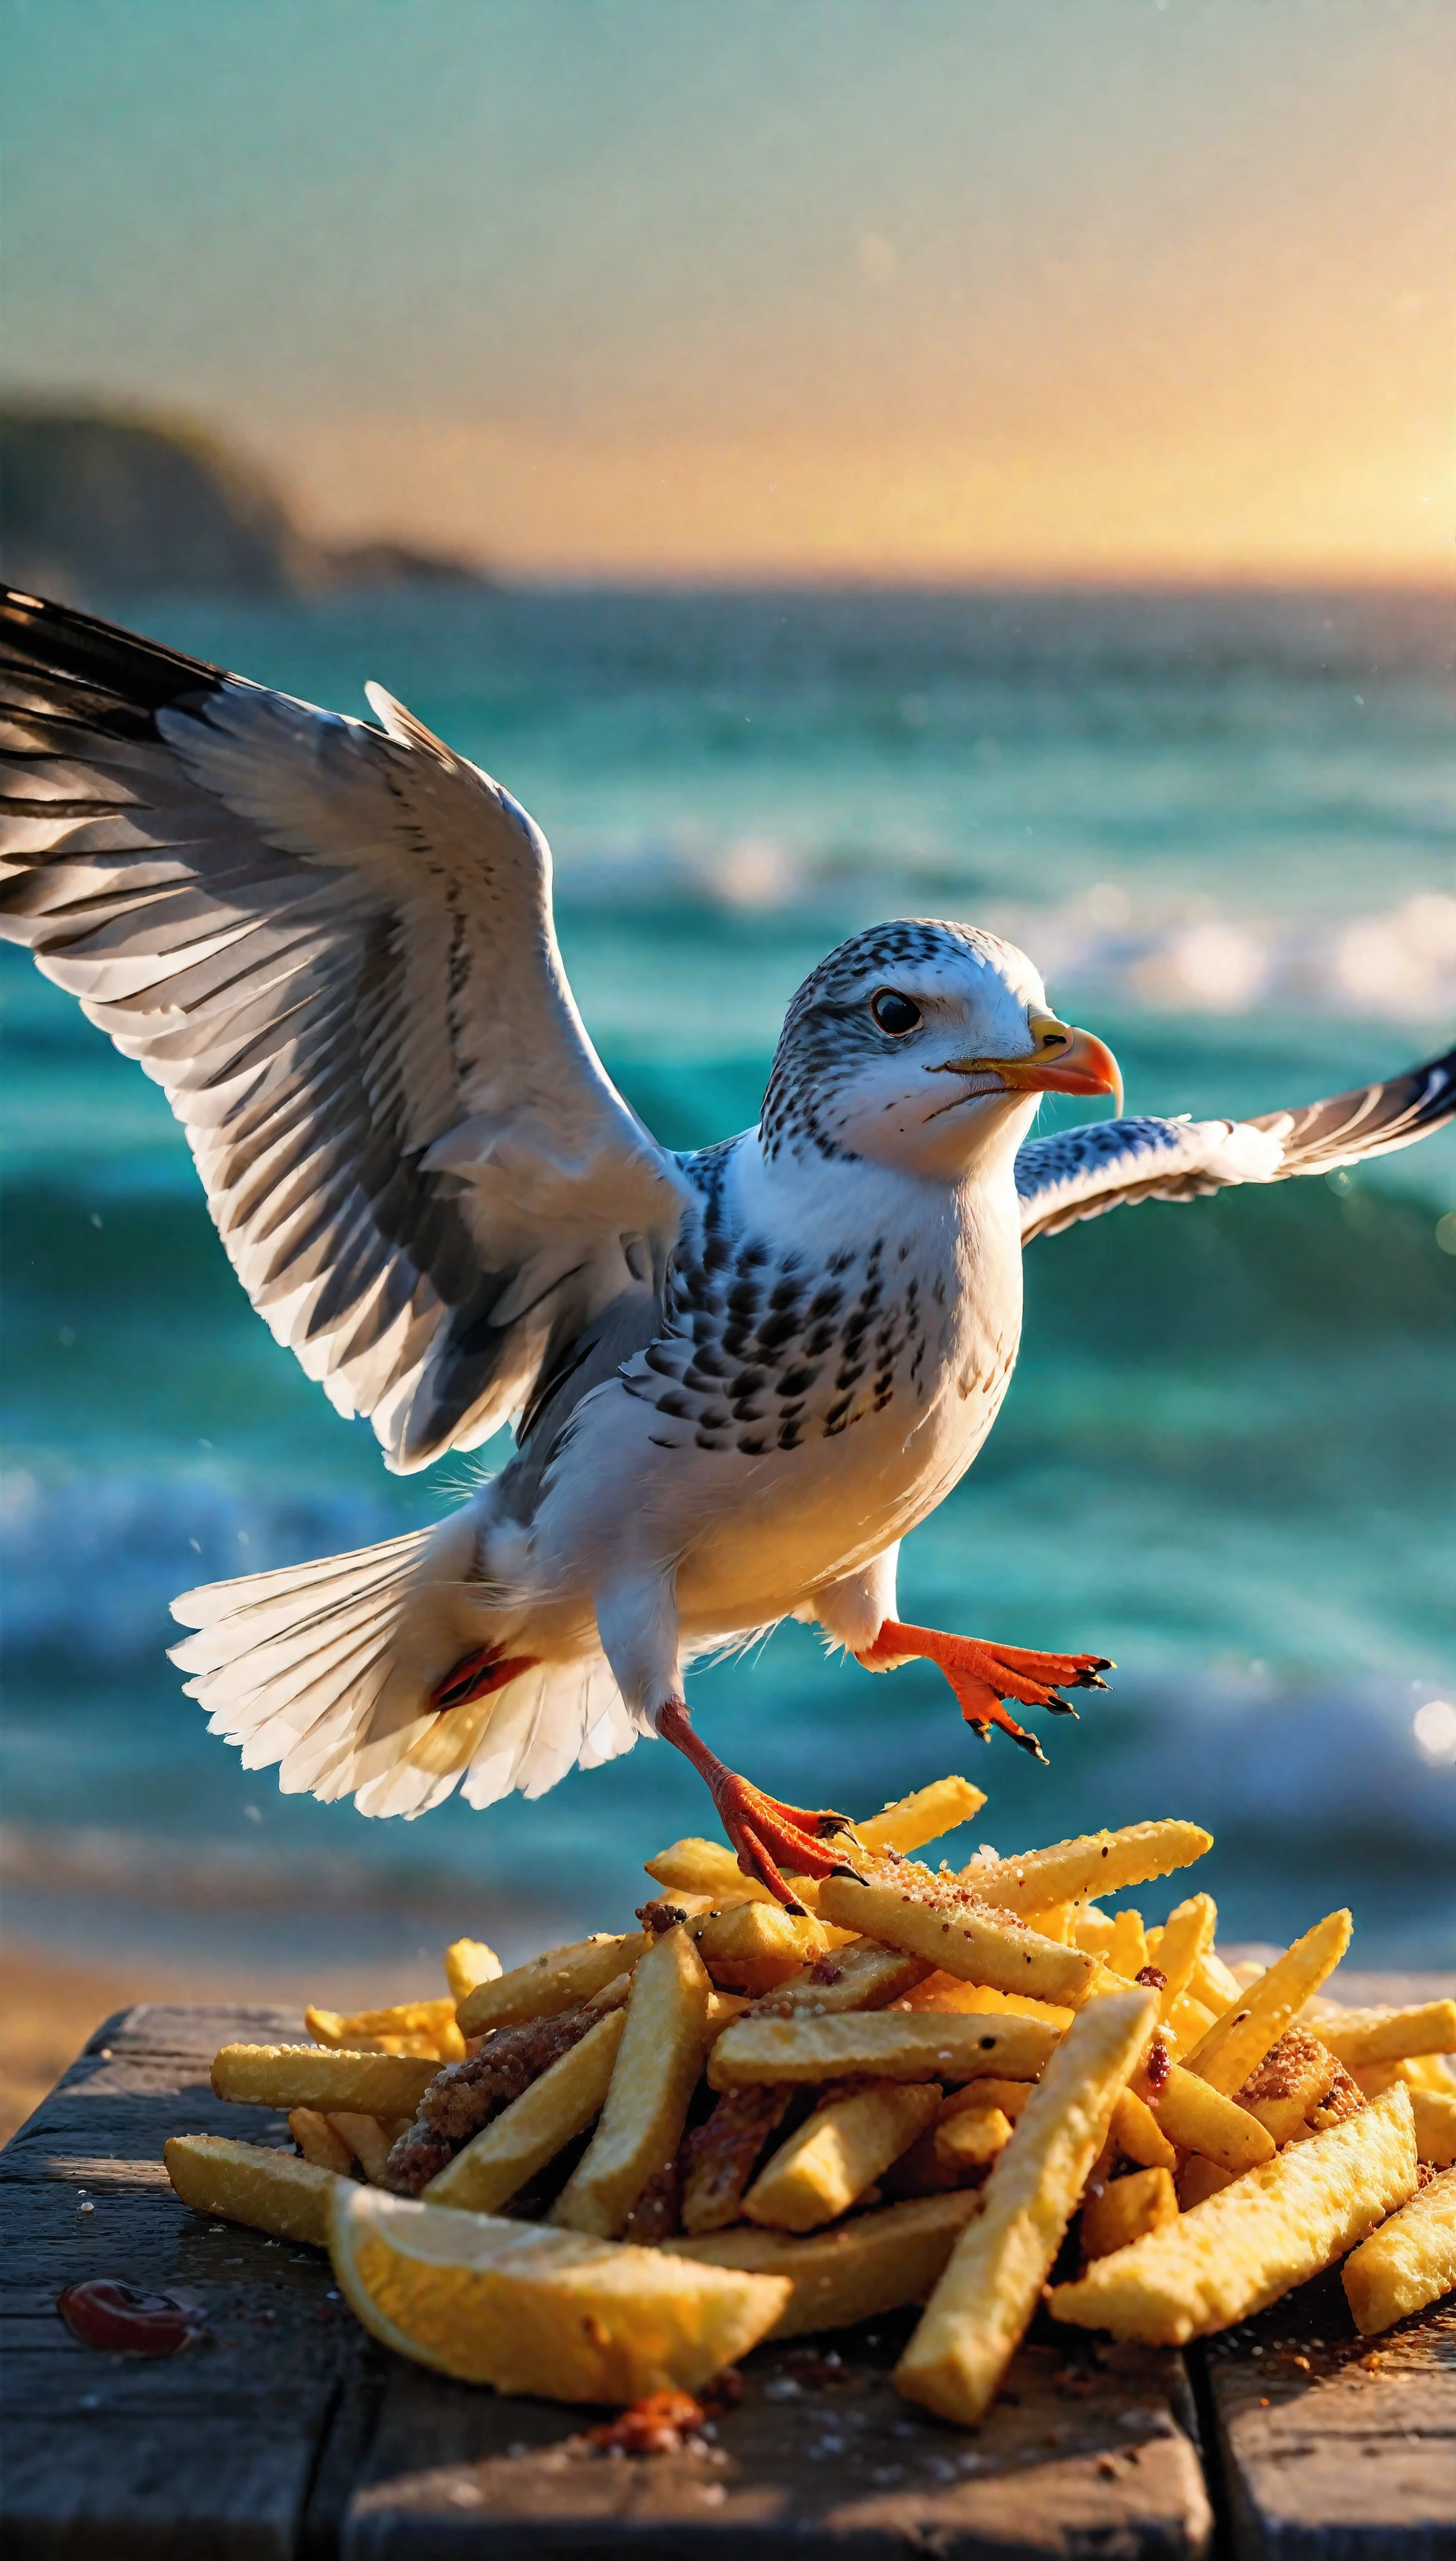 ((Masterpiece in maximum 16K resolution):1.6),((soft_color_photograpy:)1.5), ((Ultra-Detailed):1.4),((Movie-like still images and dynamic angles):1.3). | (Macro shot cinematic photo of seagull flying over a beach table with french fries.), ((detailed seagull, detailed french fries, beach, detailed wooden table, sunset, golden hour lighting, vibrant colors):1.2), (macro lens), (exotic animal), (cute), (delightful atmosphere), (aesthetic photography style), (visual experience),(Realism), (Realistic),award-winning graphics, dark shot, film grain, extremely detailed, Digital Art, rtx, Unreal Engine, scene concept anti glare effect, All captured with sharp focus. | Rendered in ultra-high definition with UHD and retina quality, this masterpiece ensures anatomical correctness and textured skin with super detail. With a focus on high quality and accuracy, this award-winning portrayal captures every nuance in stunning 16k resolution, immersing viewers in its lifelike depiction. | ((perfect_composition, perfect_design, perfect_layout, perfect_detail, ultra_detailed)), ((enhance_all, fix_everything)), More Detail, Enhance.